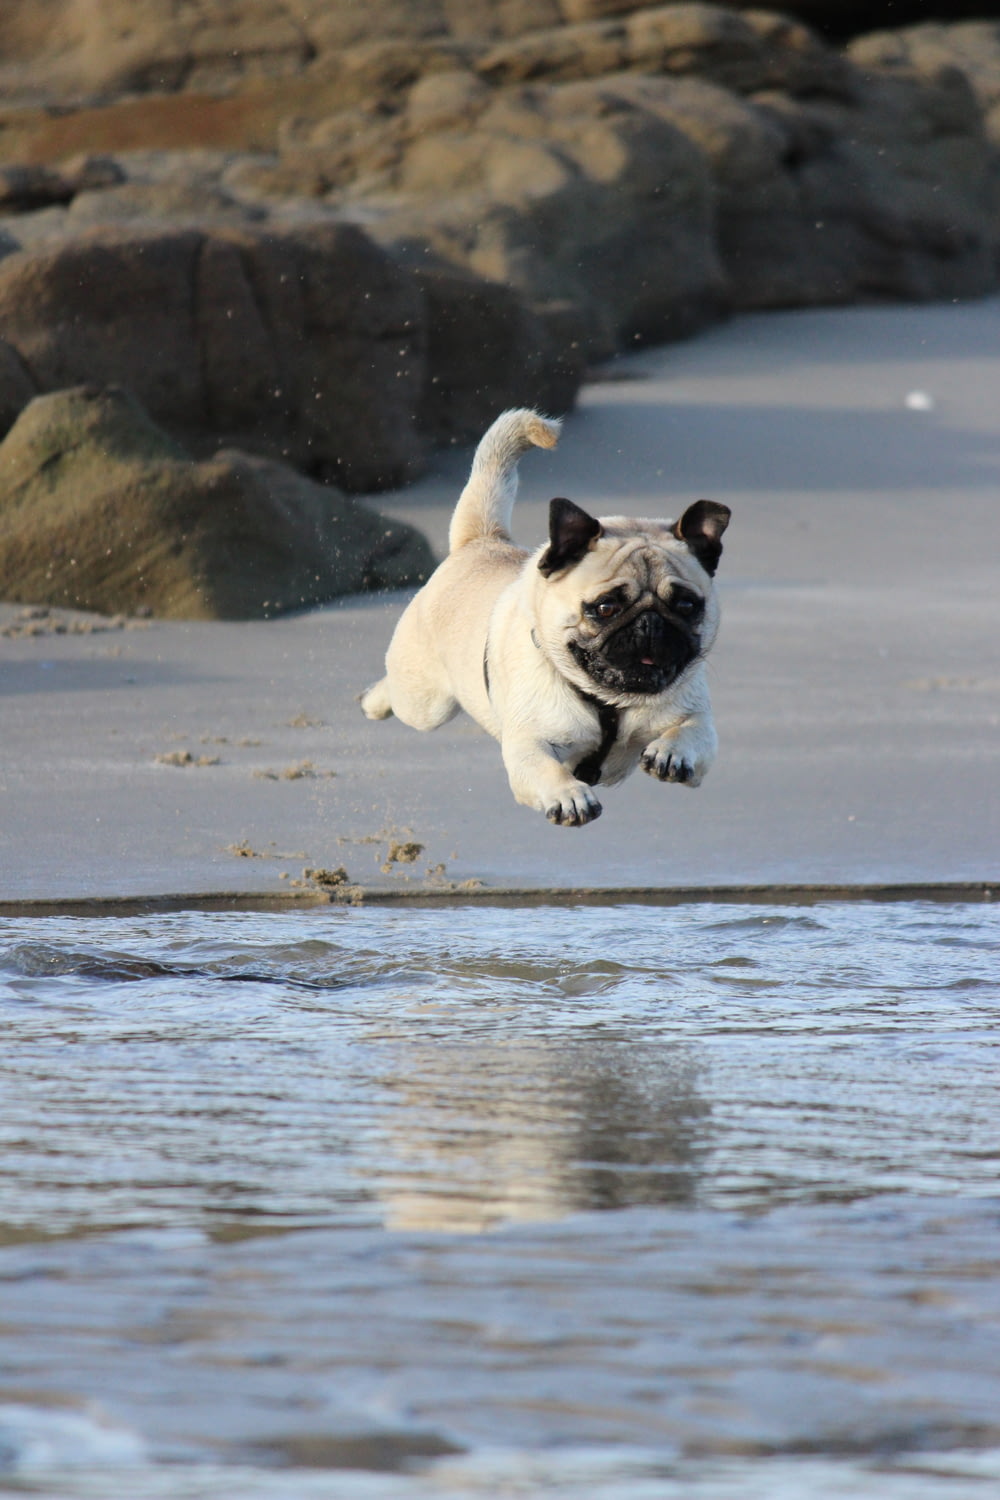 fawn pug jumping on water